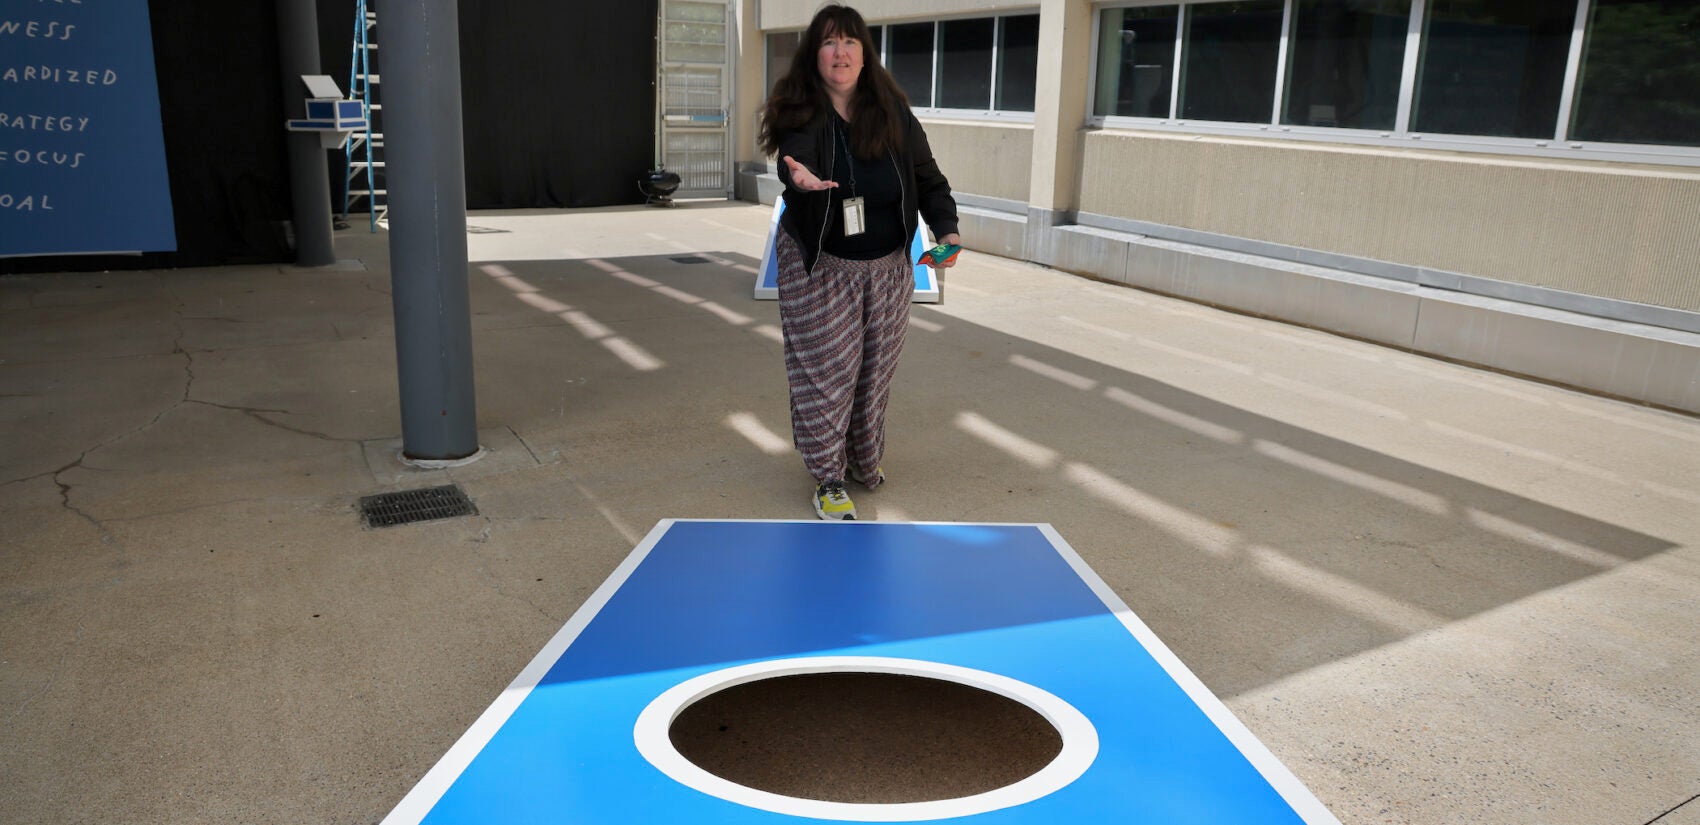 Kate Abercrombie, artist and registrar at the Institute of Contemporary Art, plays with the oversized cornhole game that is part of the exhibit ''Where I Learned to Look: Art From the Yard.'' (Emma Lee/WHYY)